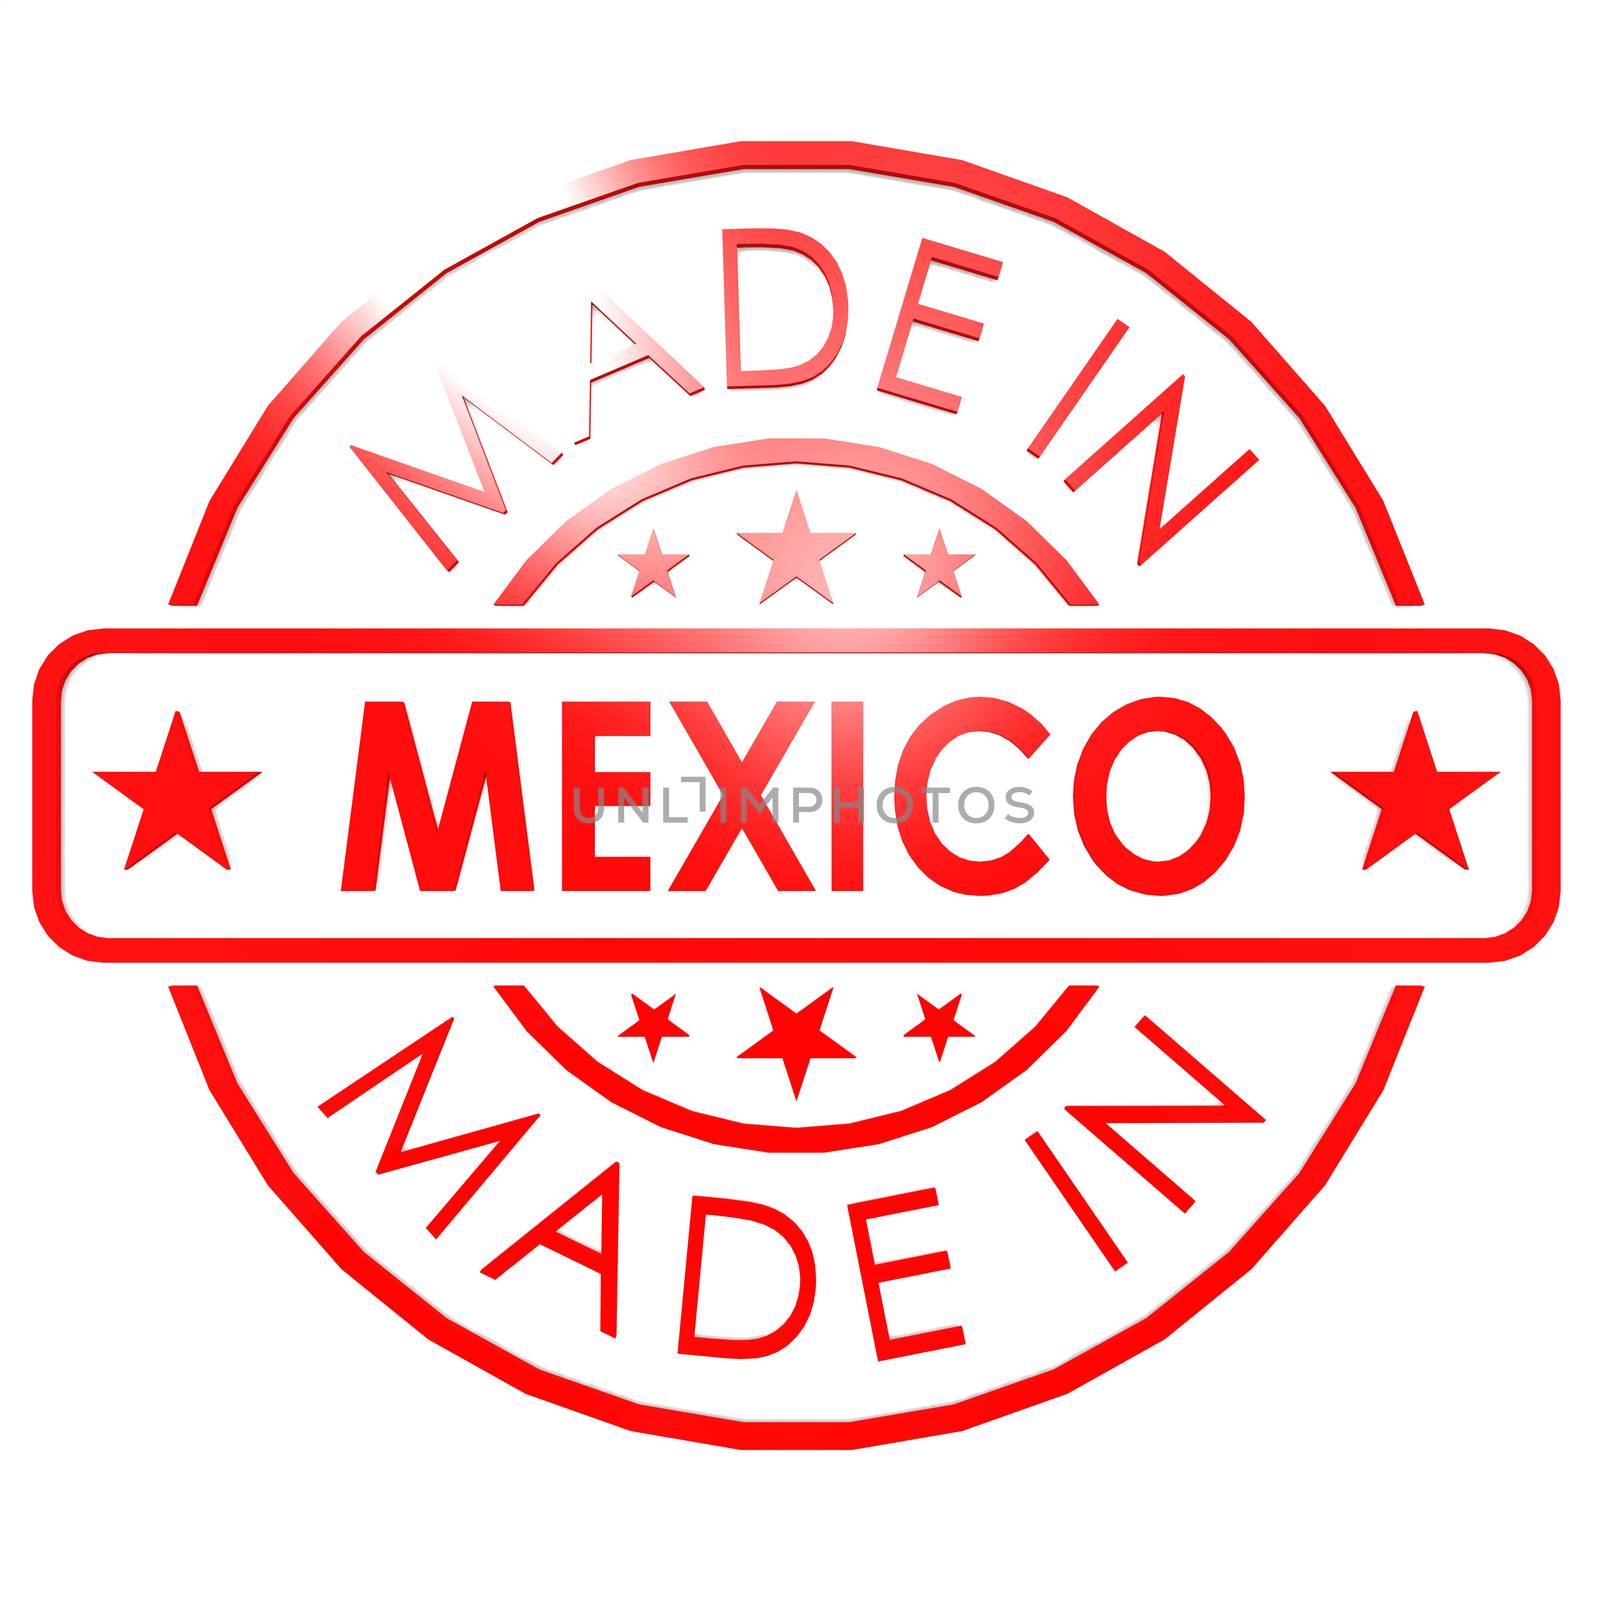 Made in Mexico red seal by tang90246